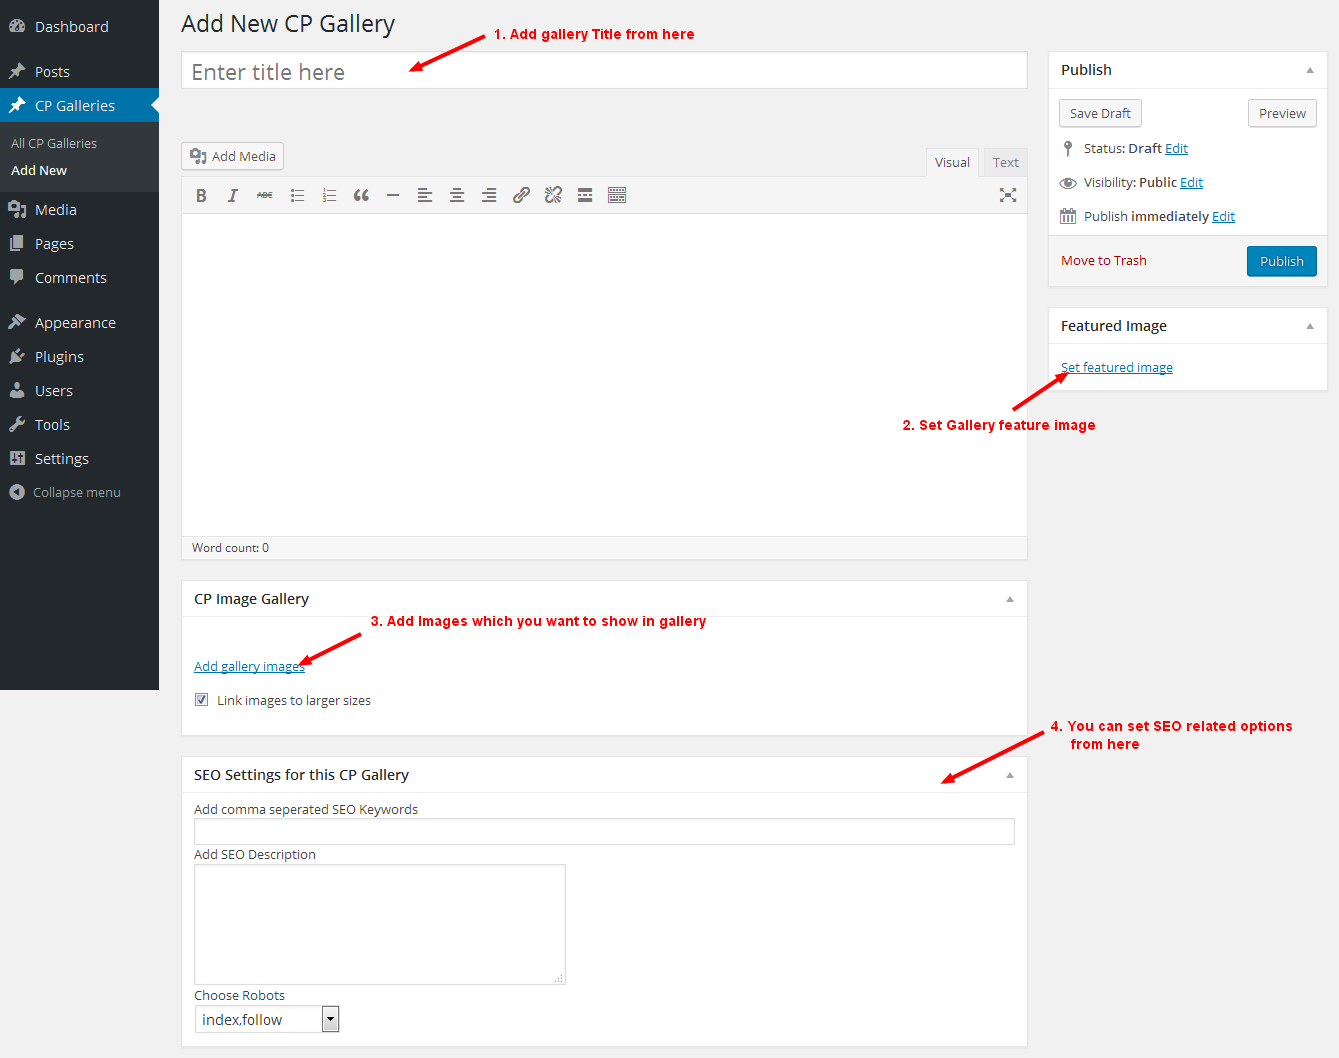 Show steps to add gallery and gallery images from backend. (Screenshot-2)